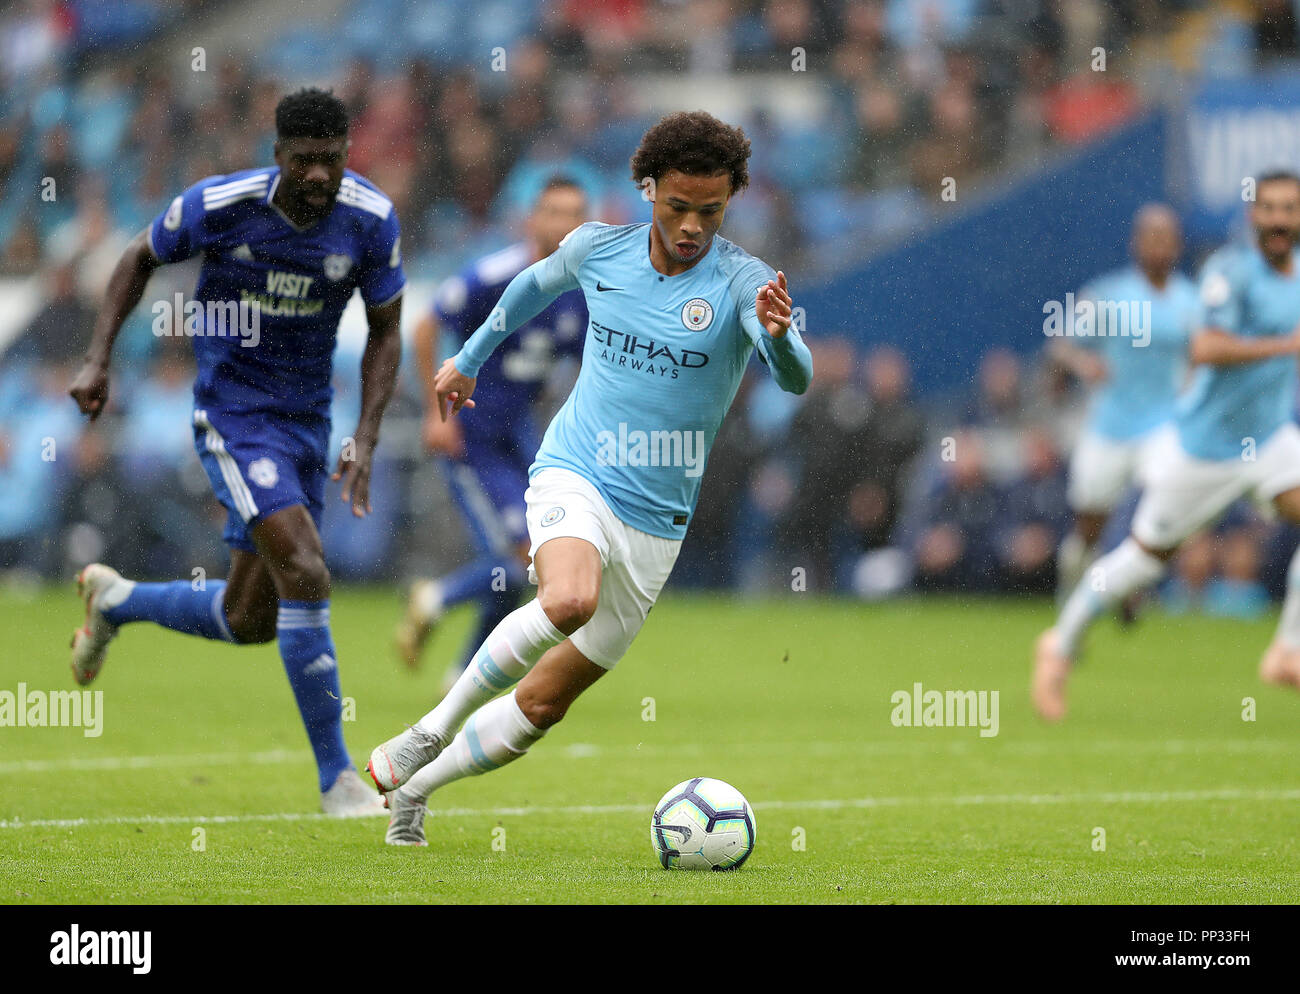 Manchester Citys Leroy Sane during the Premier League match at The Cardiff City Stadium. PRESS ASSOCIATION Photo. Picture date Saturday September 22, 2018